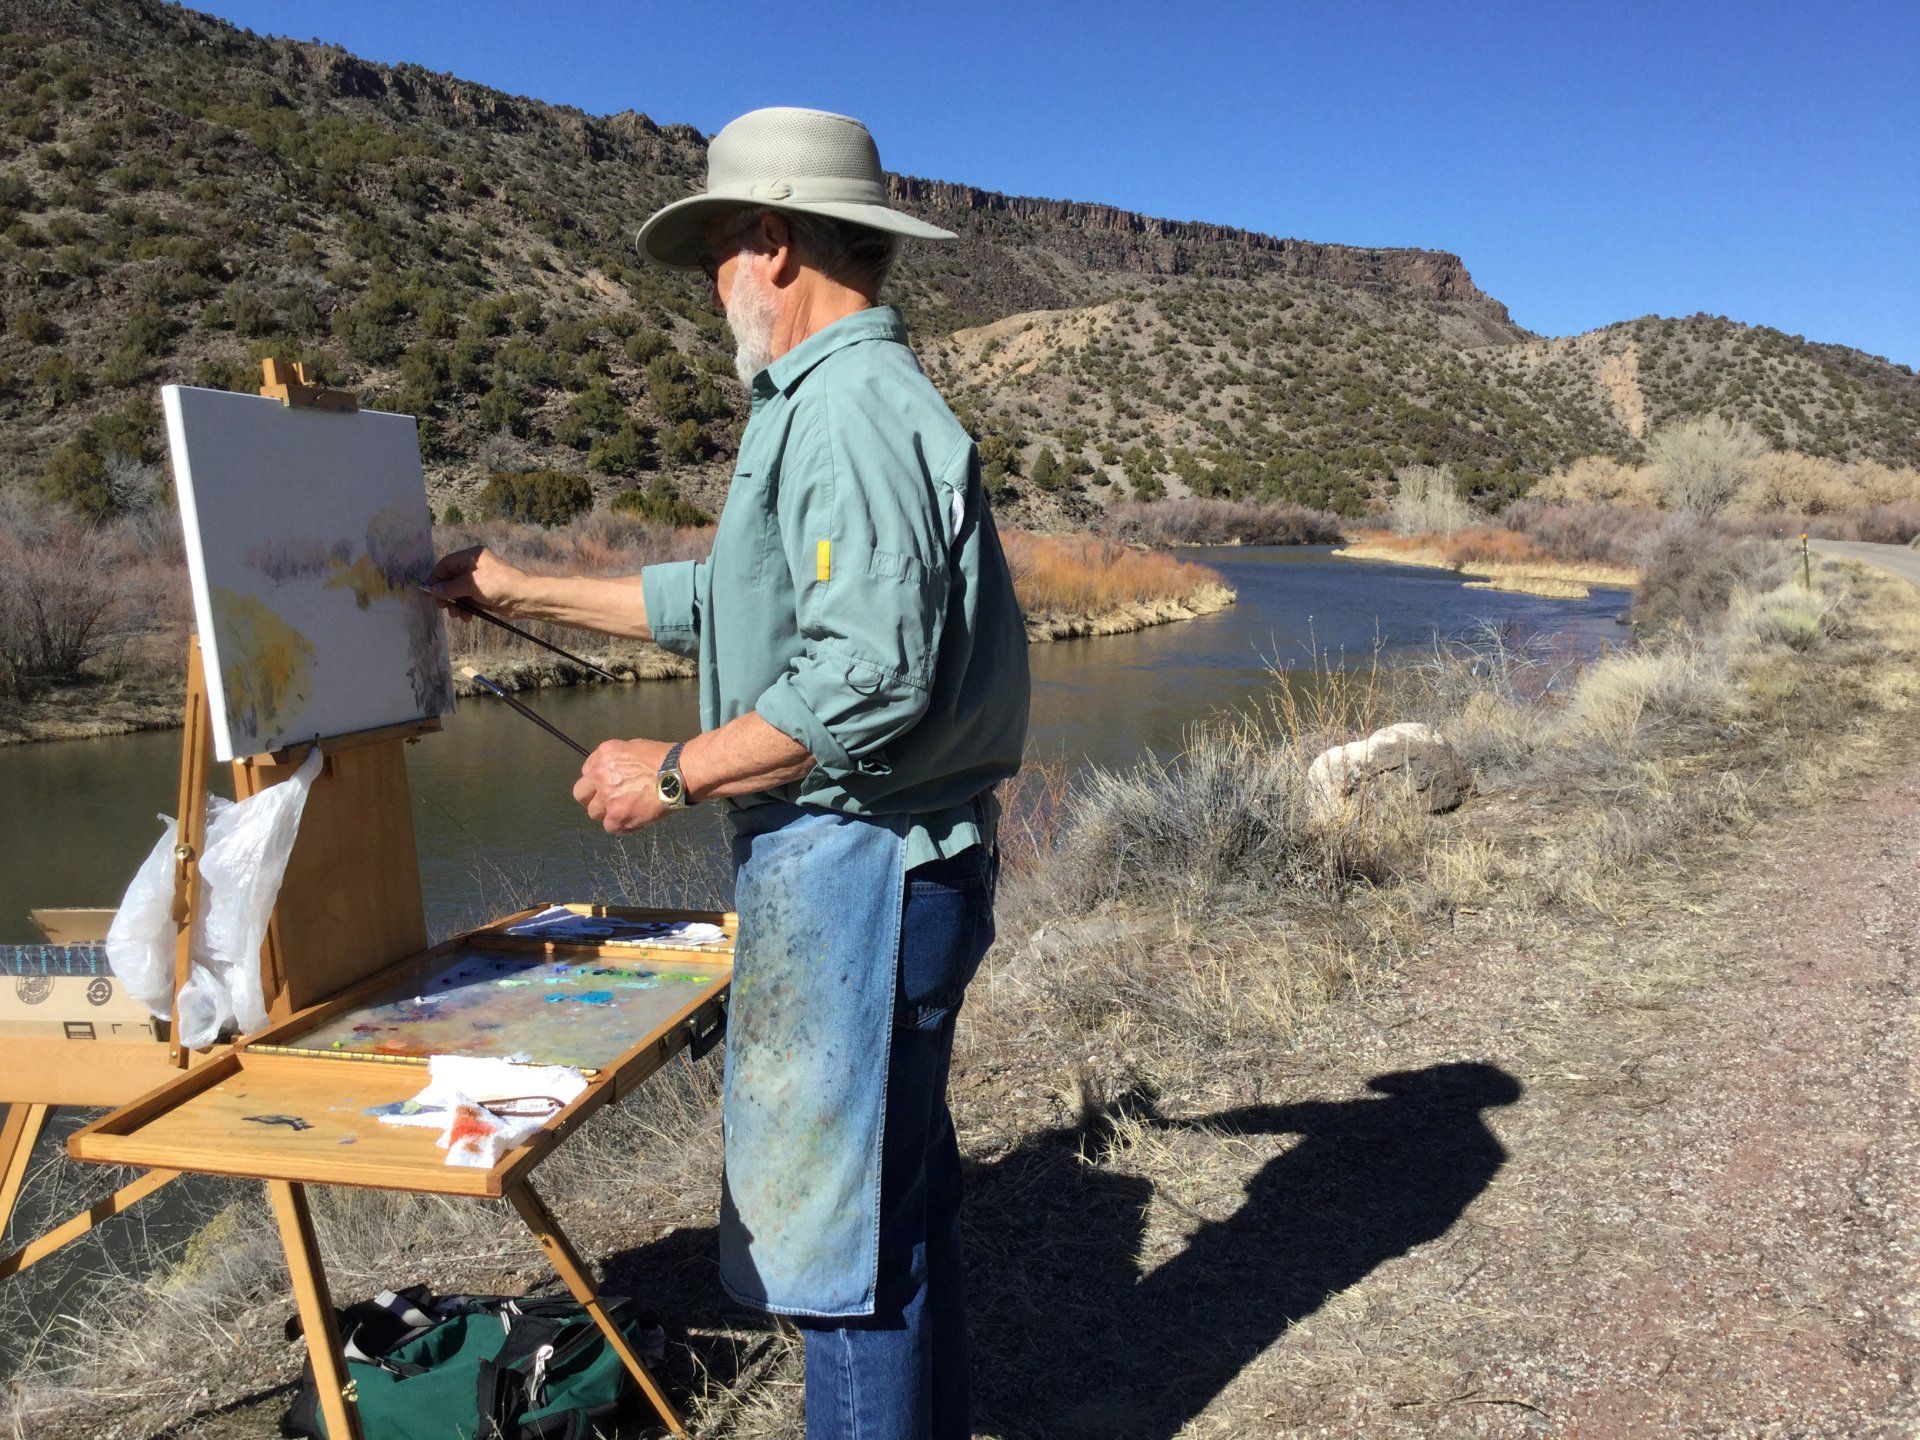 Painting On Site, New Mexico